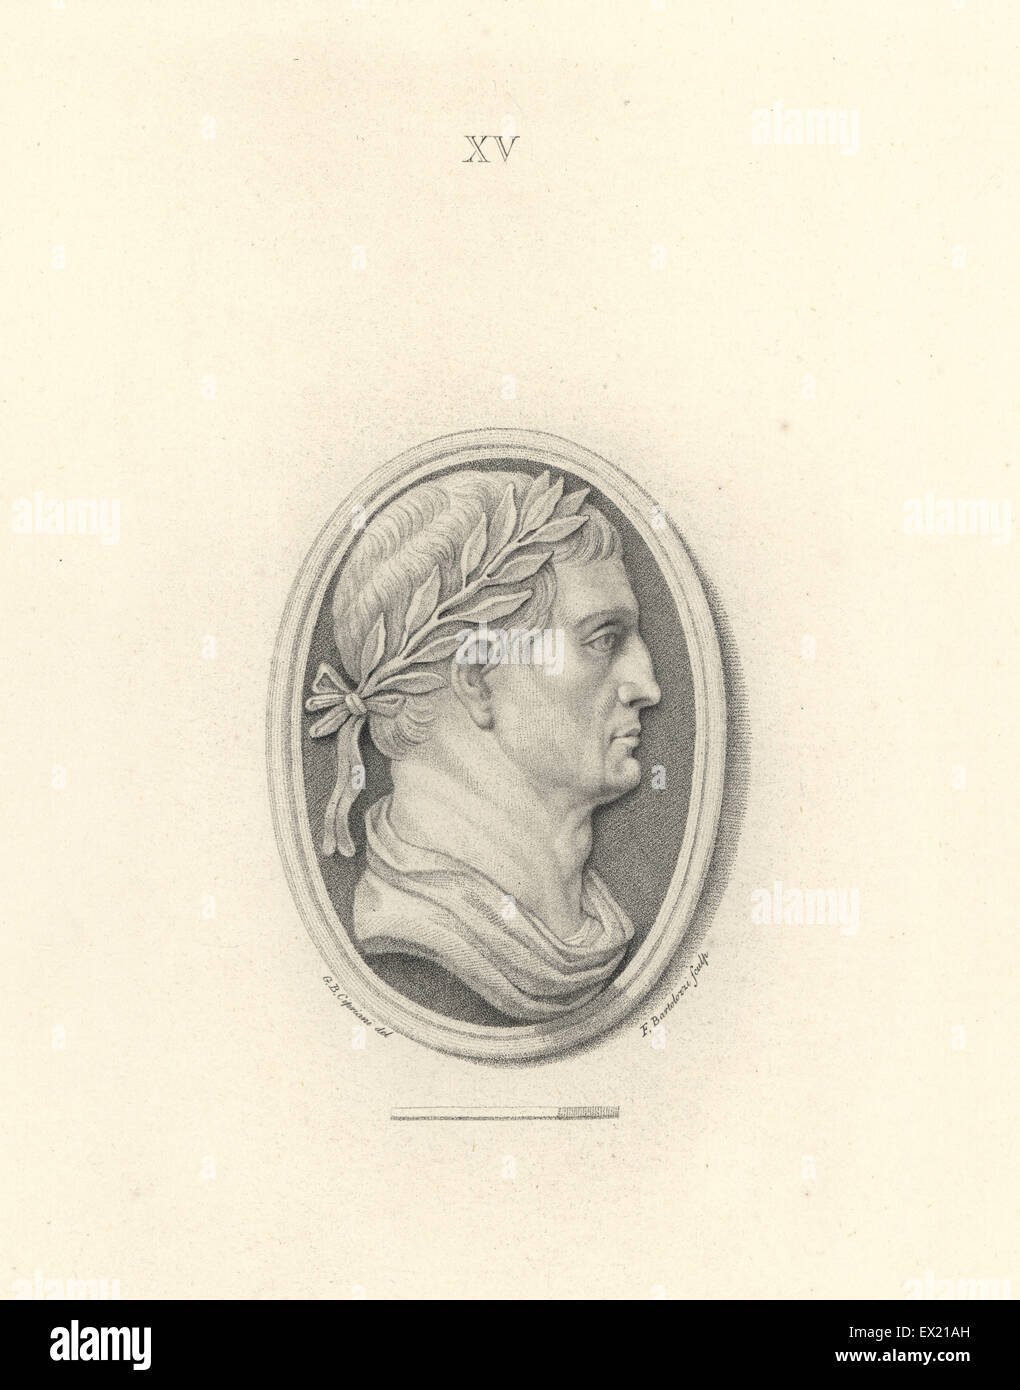 Head of Roman Emperor Galba with laurel wreath. Copperplate engraving by Francesco Bartolozzi after a design by Giovanni Battista Cipriani from 108 Plates of Antique Gems, 1860. The gems were from the Duke of Marlborough's collection. Stock Photo